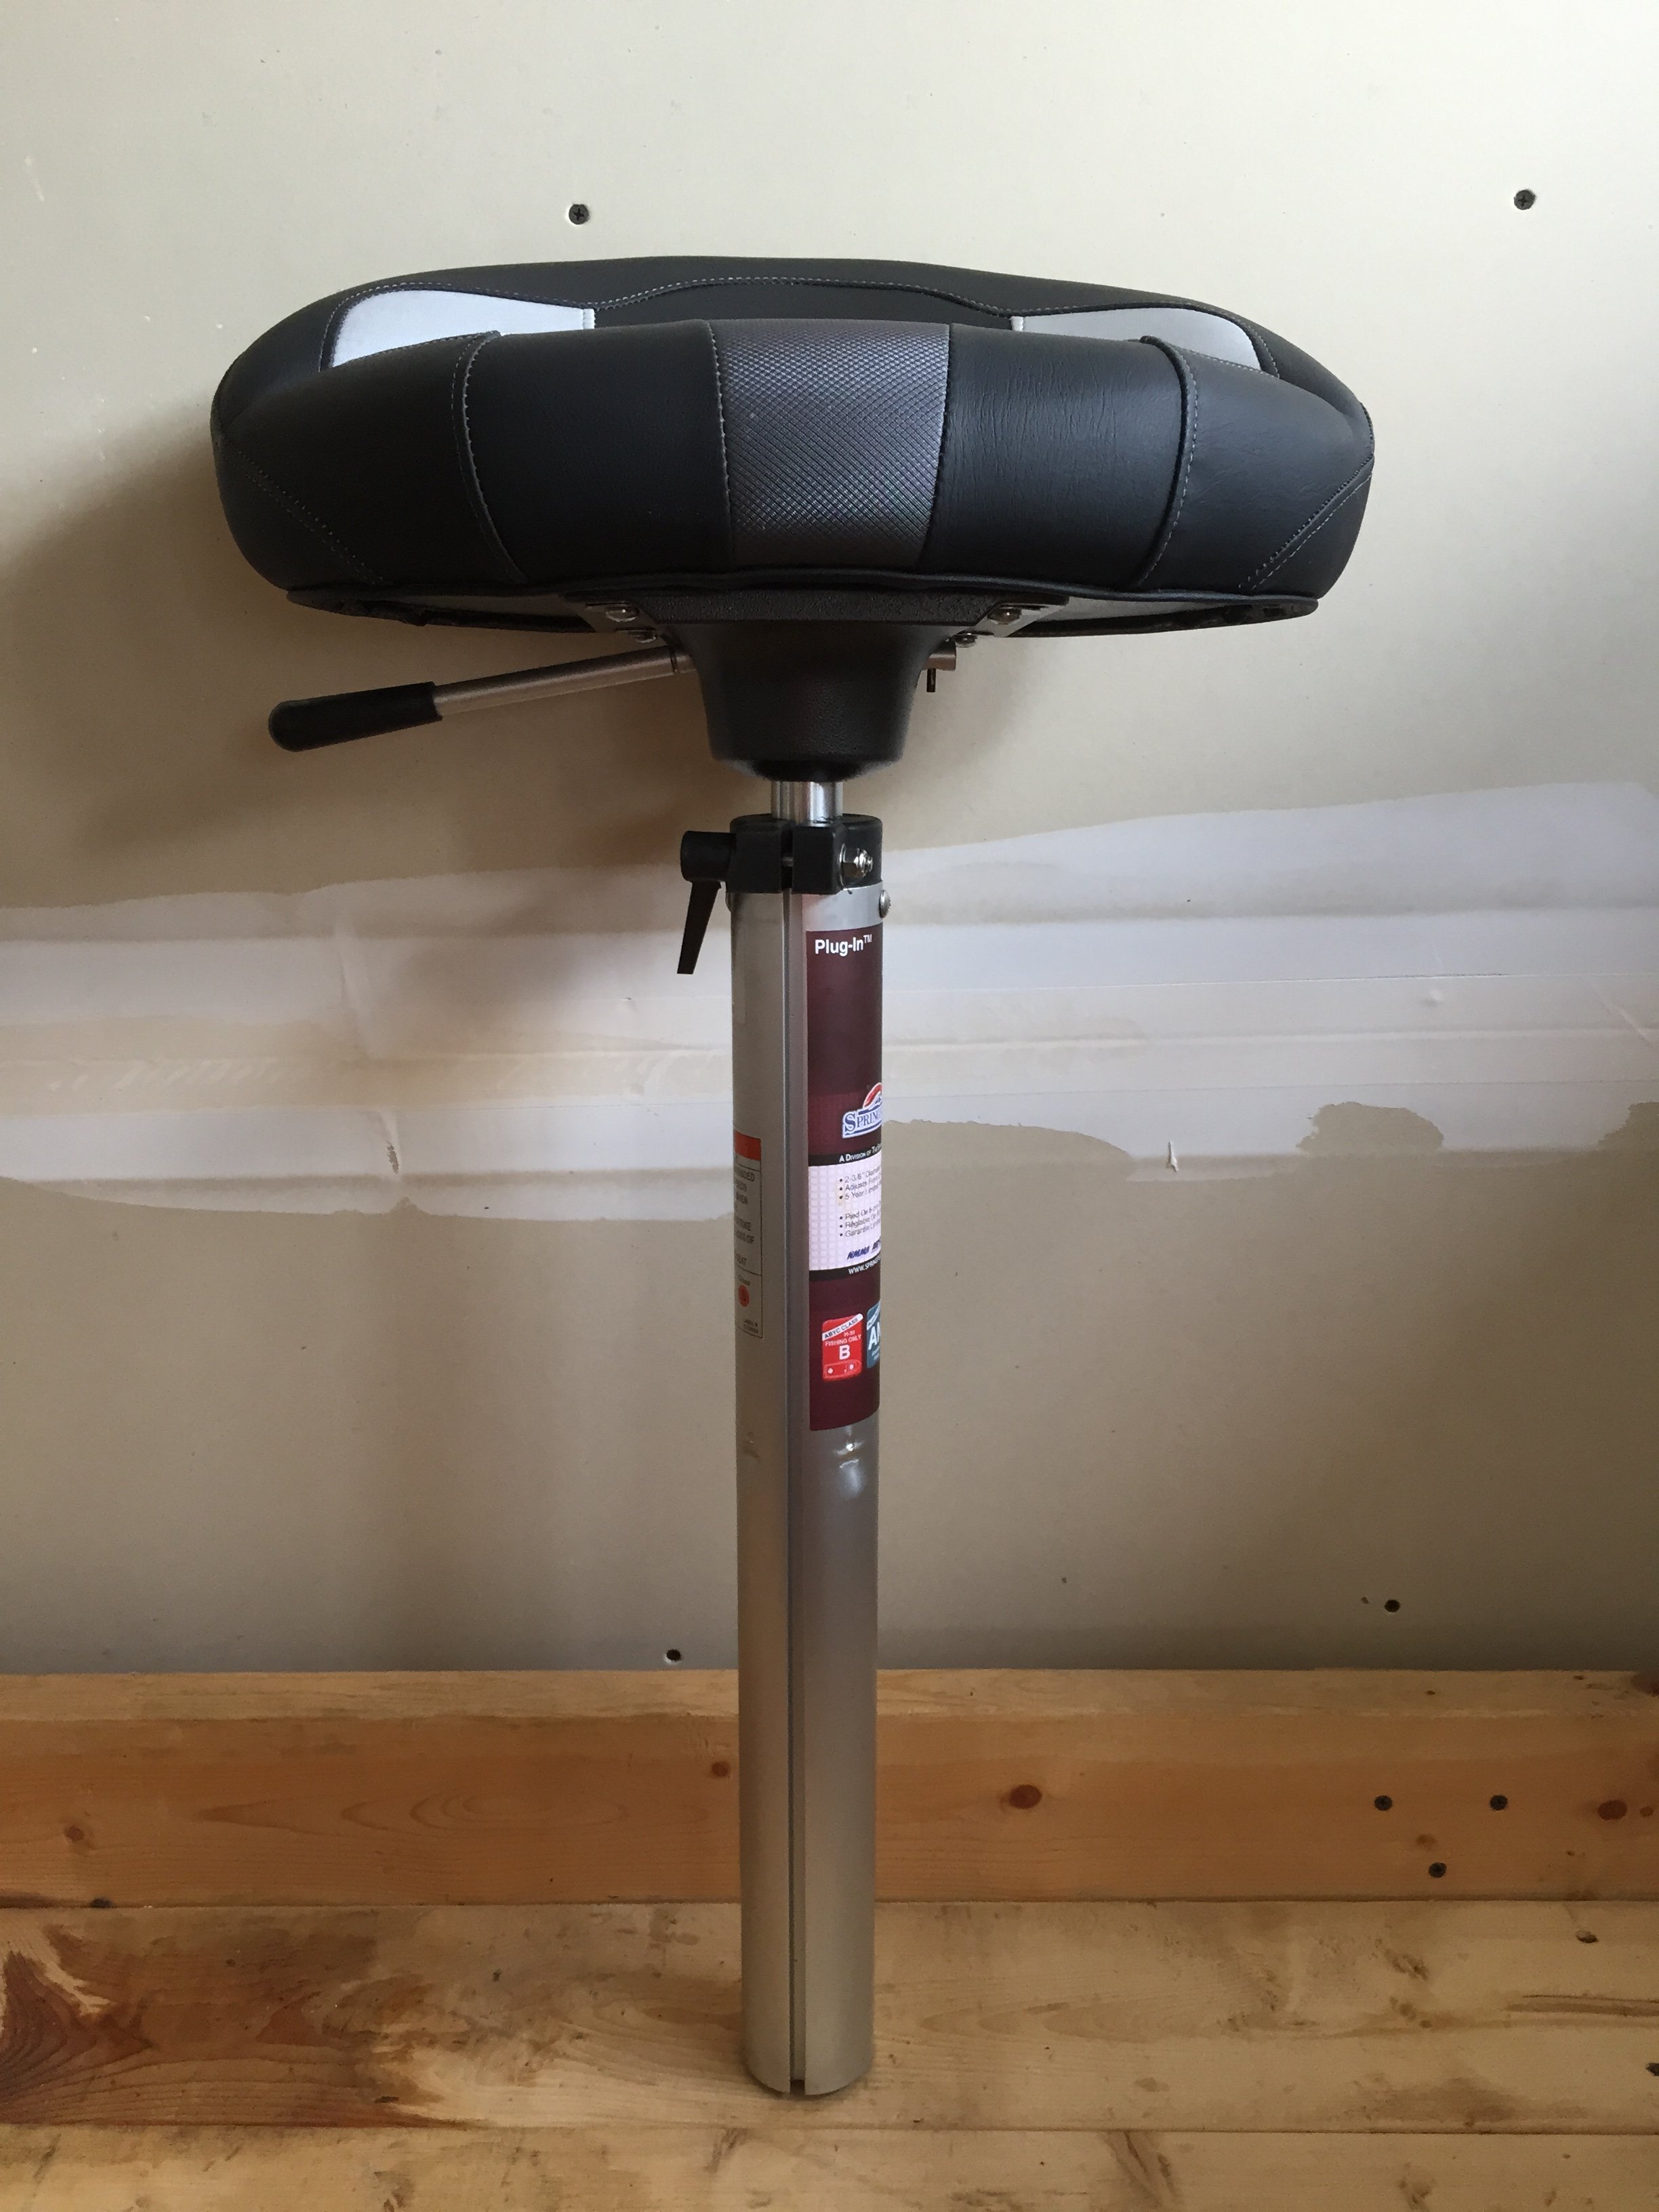 Skeeter butt seat and power pedestal NEW - Classified Ads - Classified Ads